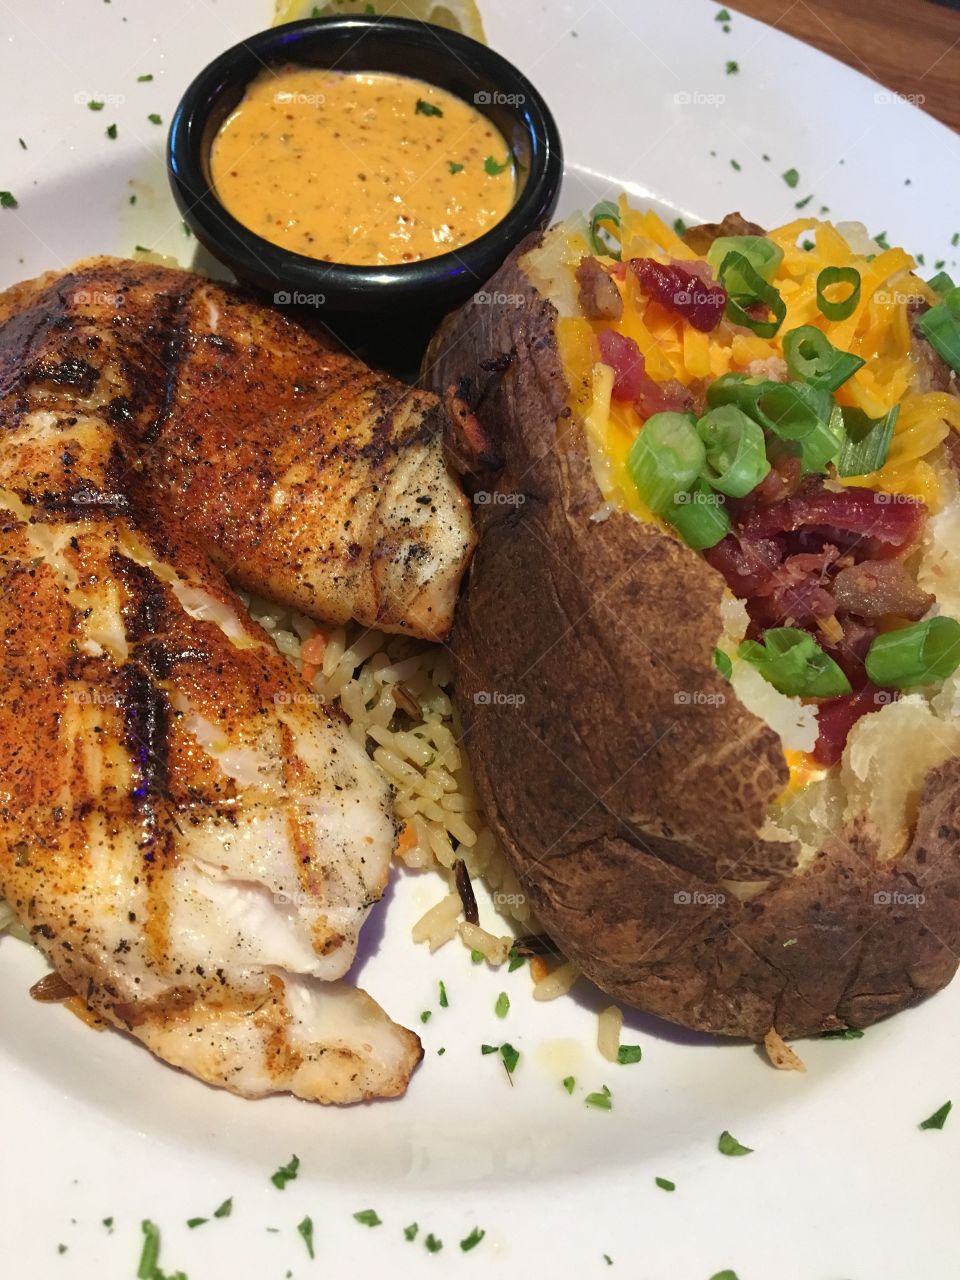 Grilled Tilapia and Baked Potato 